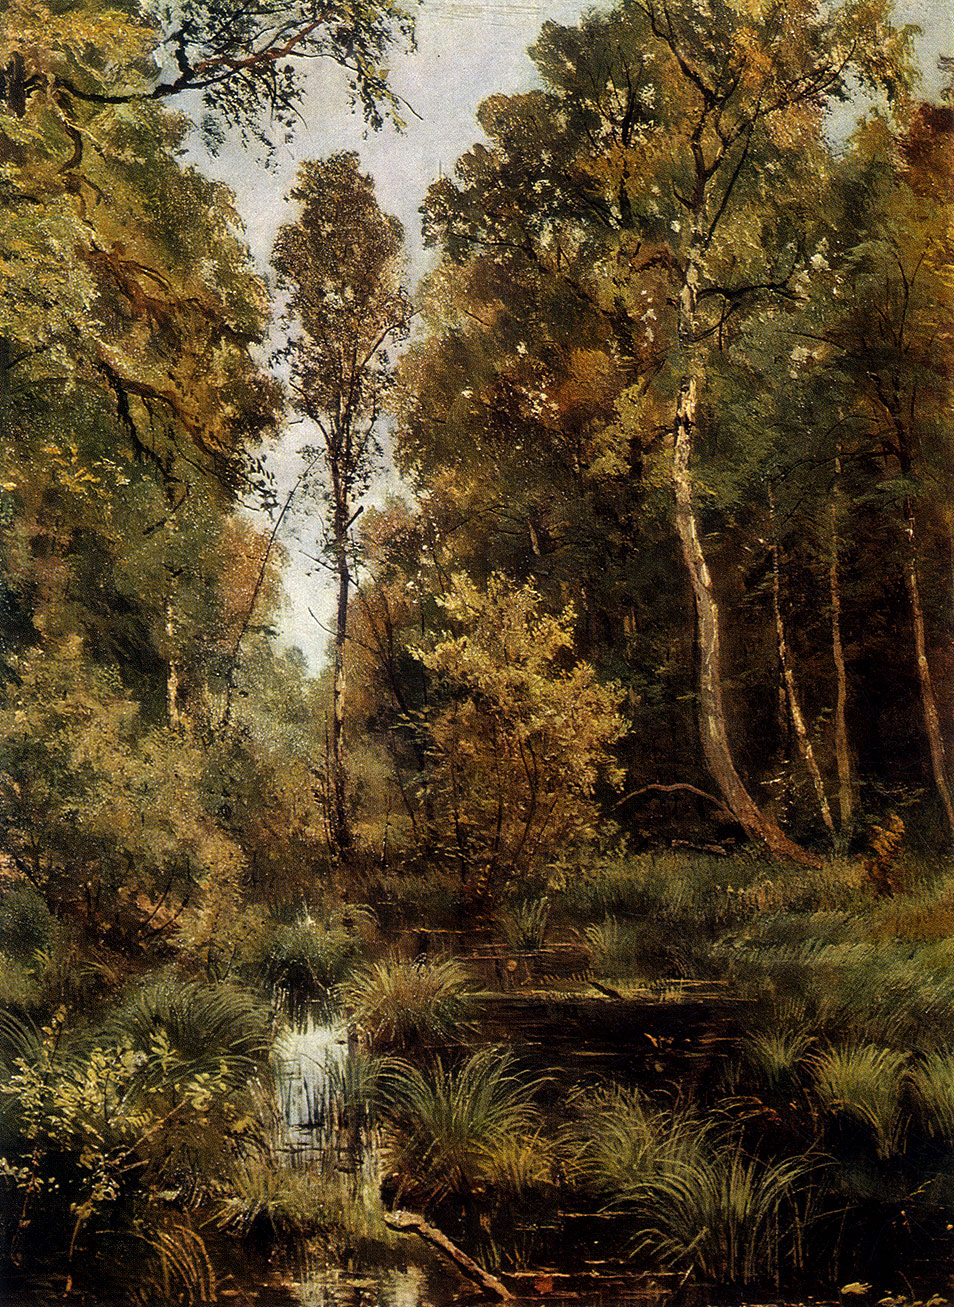 93. Overgrown pond at the edge of a forest. Siverskaya. 1883. Oil on canvas. 56X42 cm. The Tretyakov Gallery, Moscow